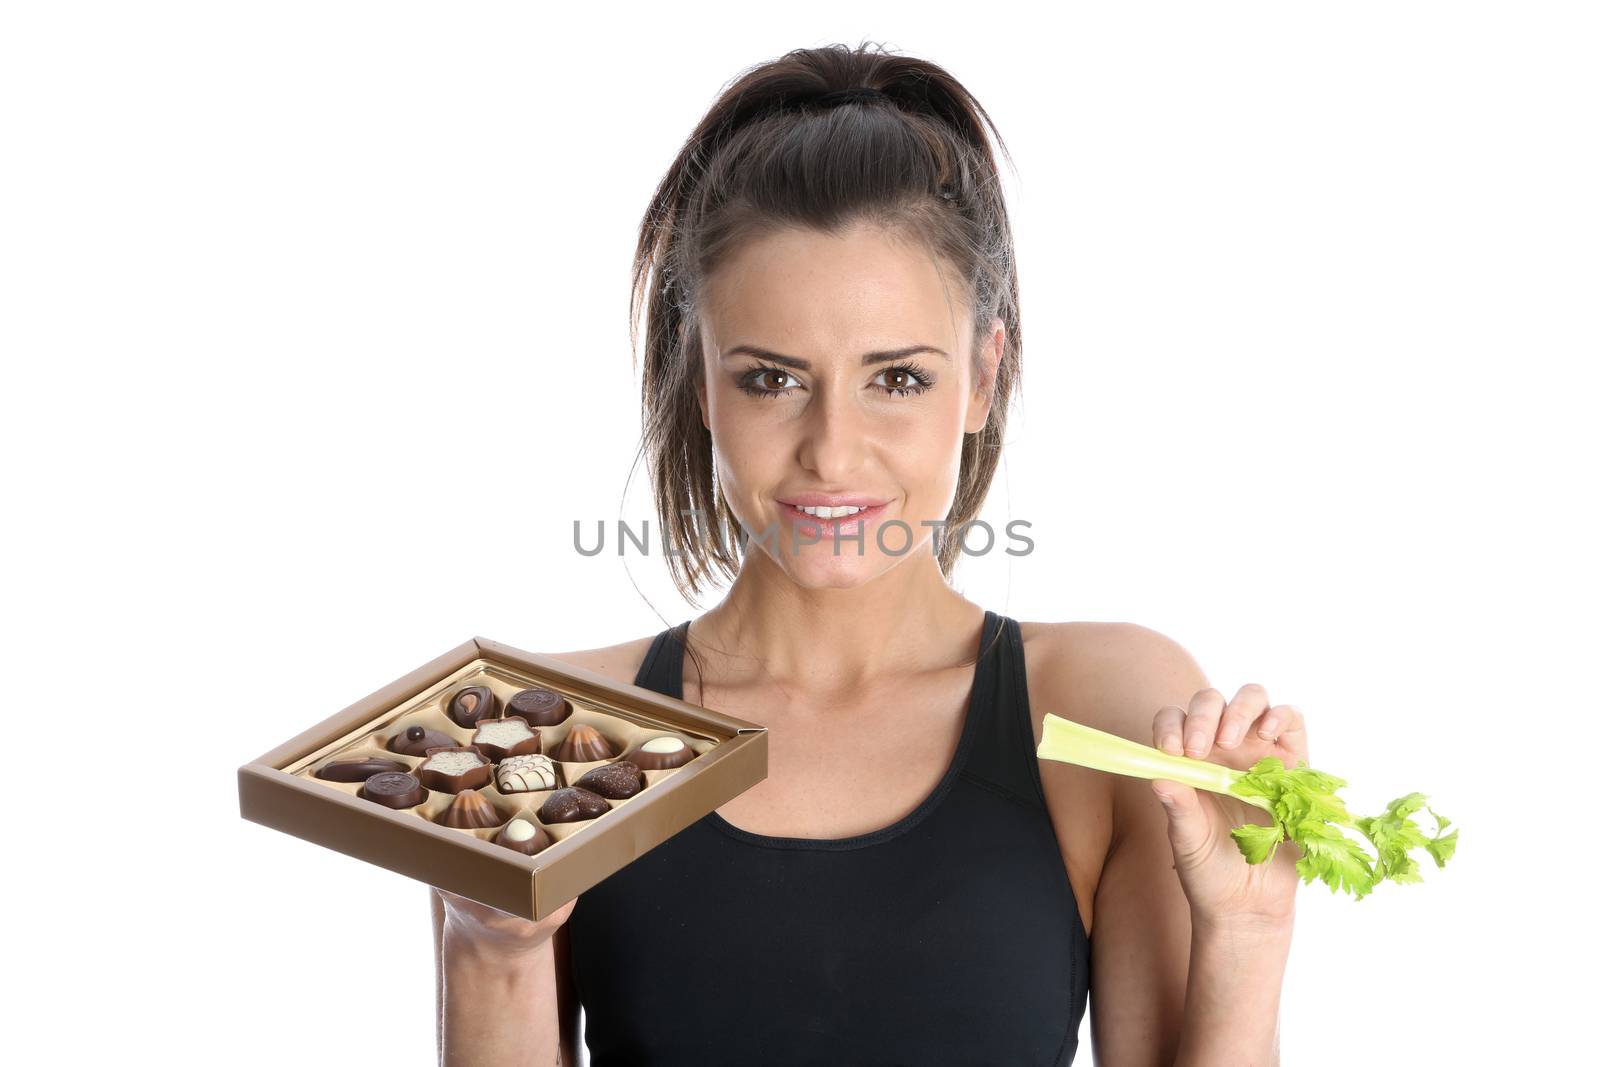 Model Released. Woman Holding Celery and Chocolates by Whiteboxmedia